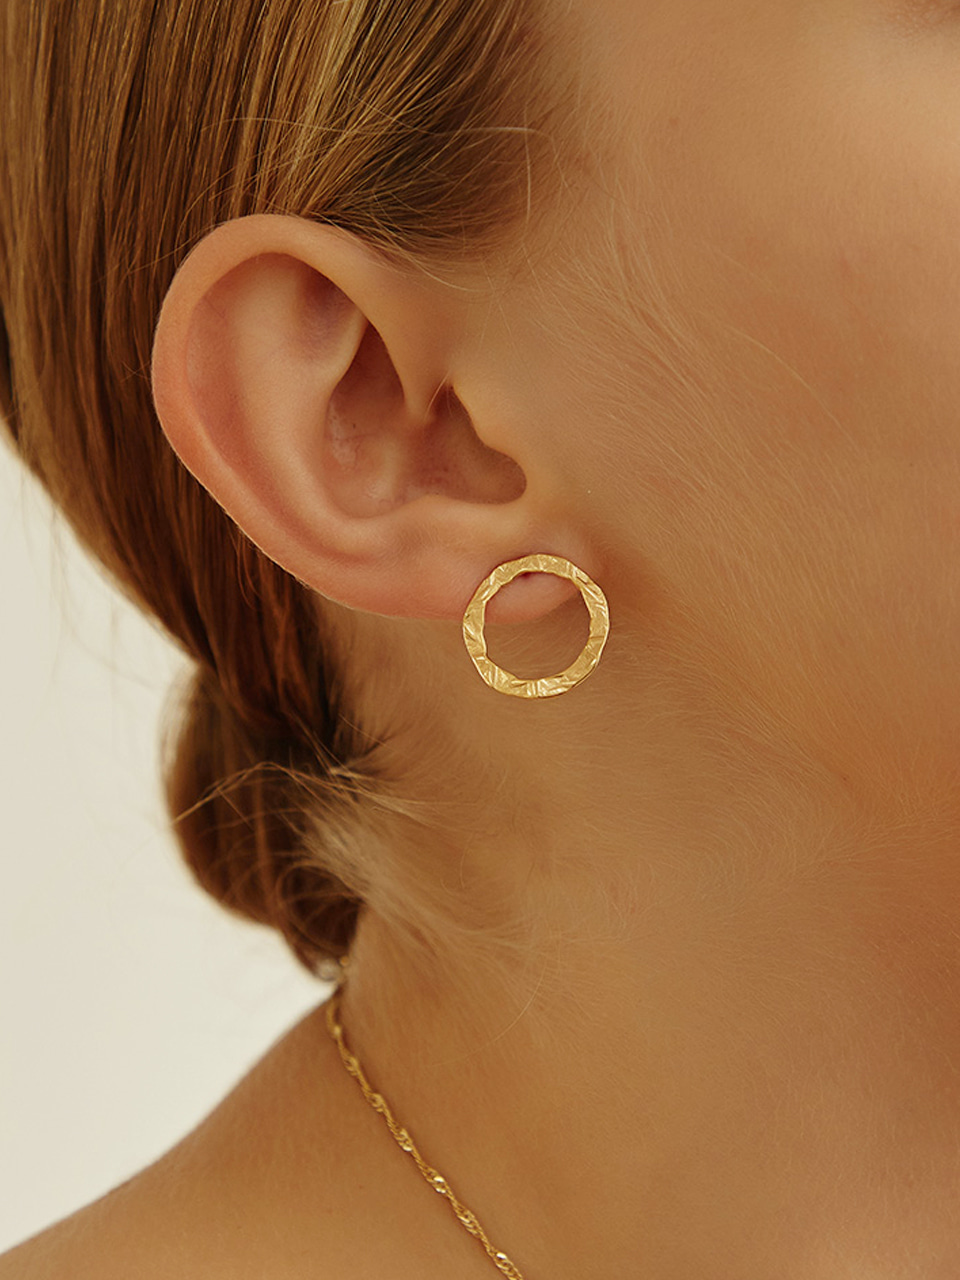 [silver925]circle texture earring